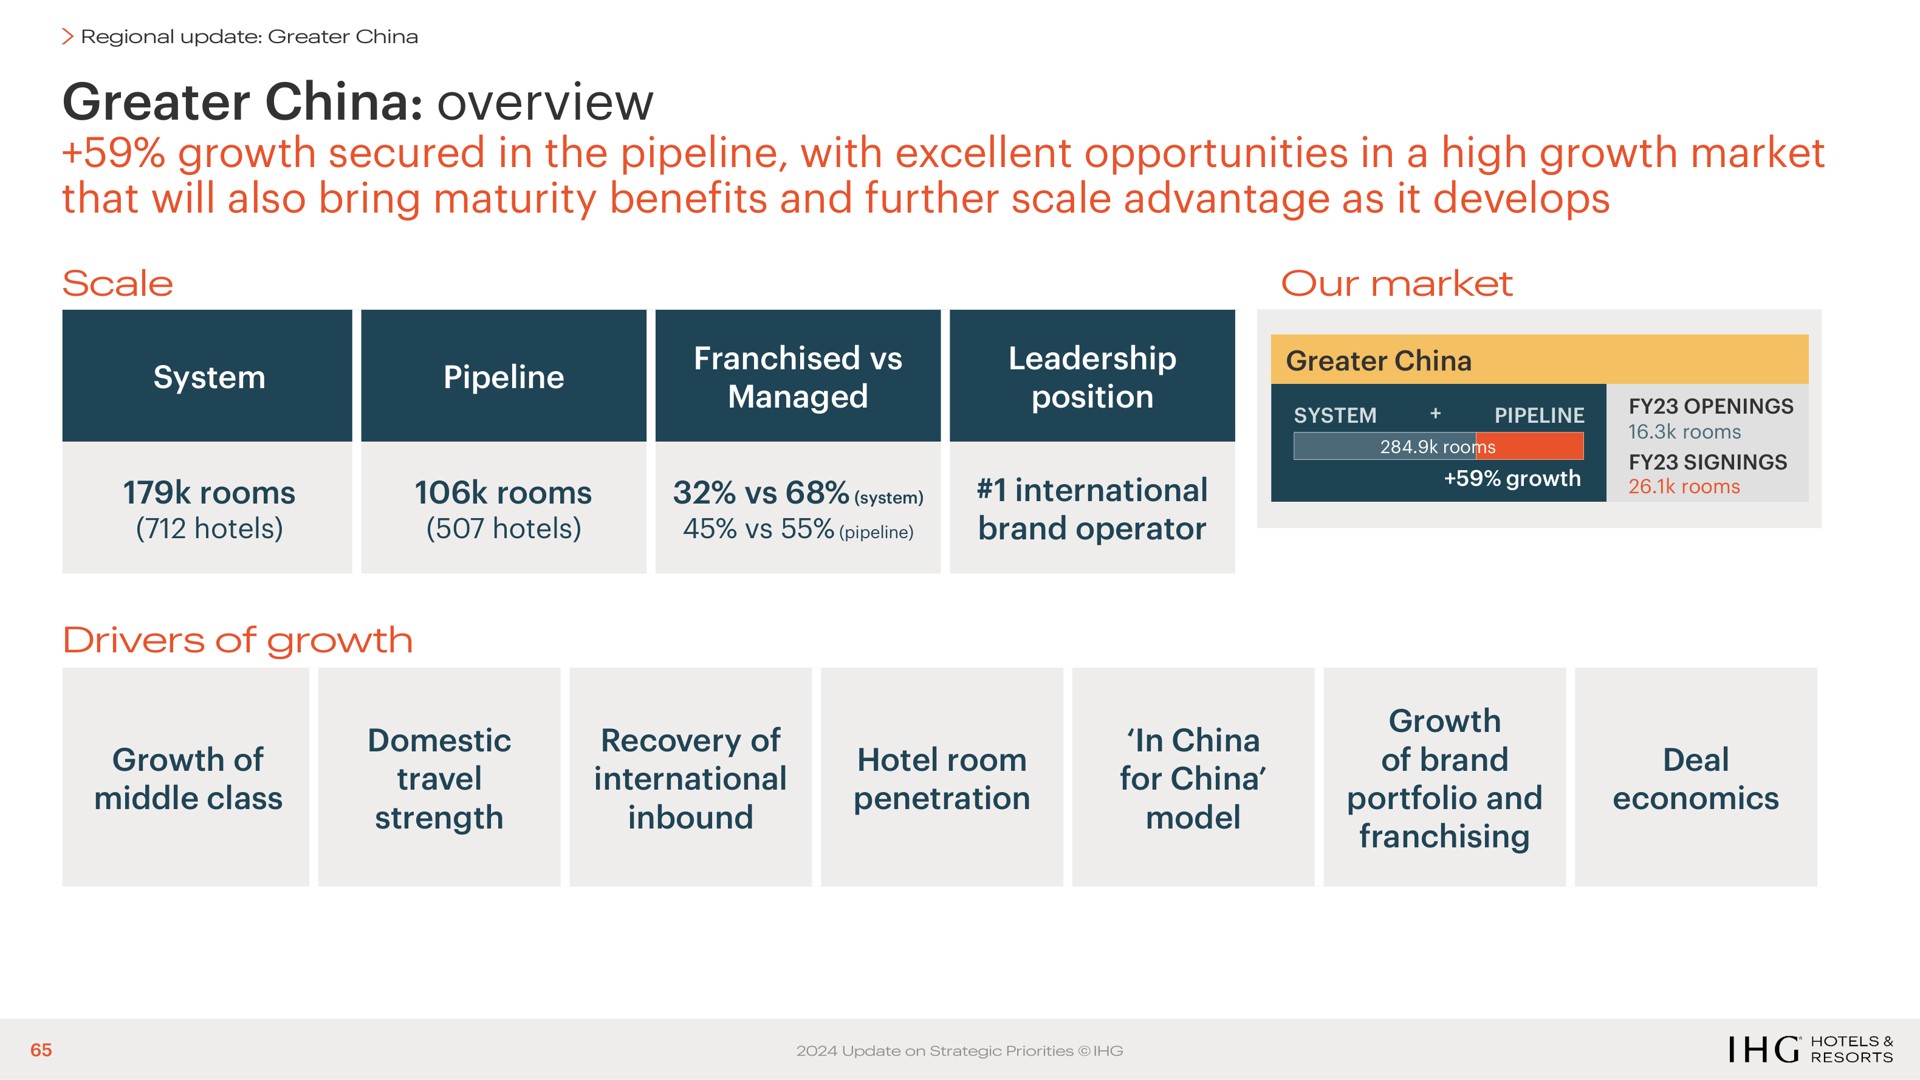 greater china overview growth secured in the pipeline with excellent opportunities in a high growth market that will also bring maturity benefits and further scale advantage as it develops | IHG Hotels